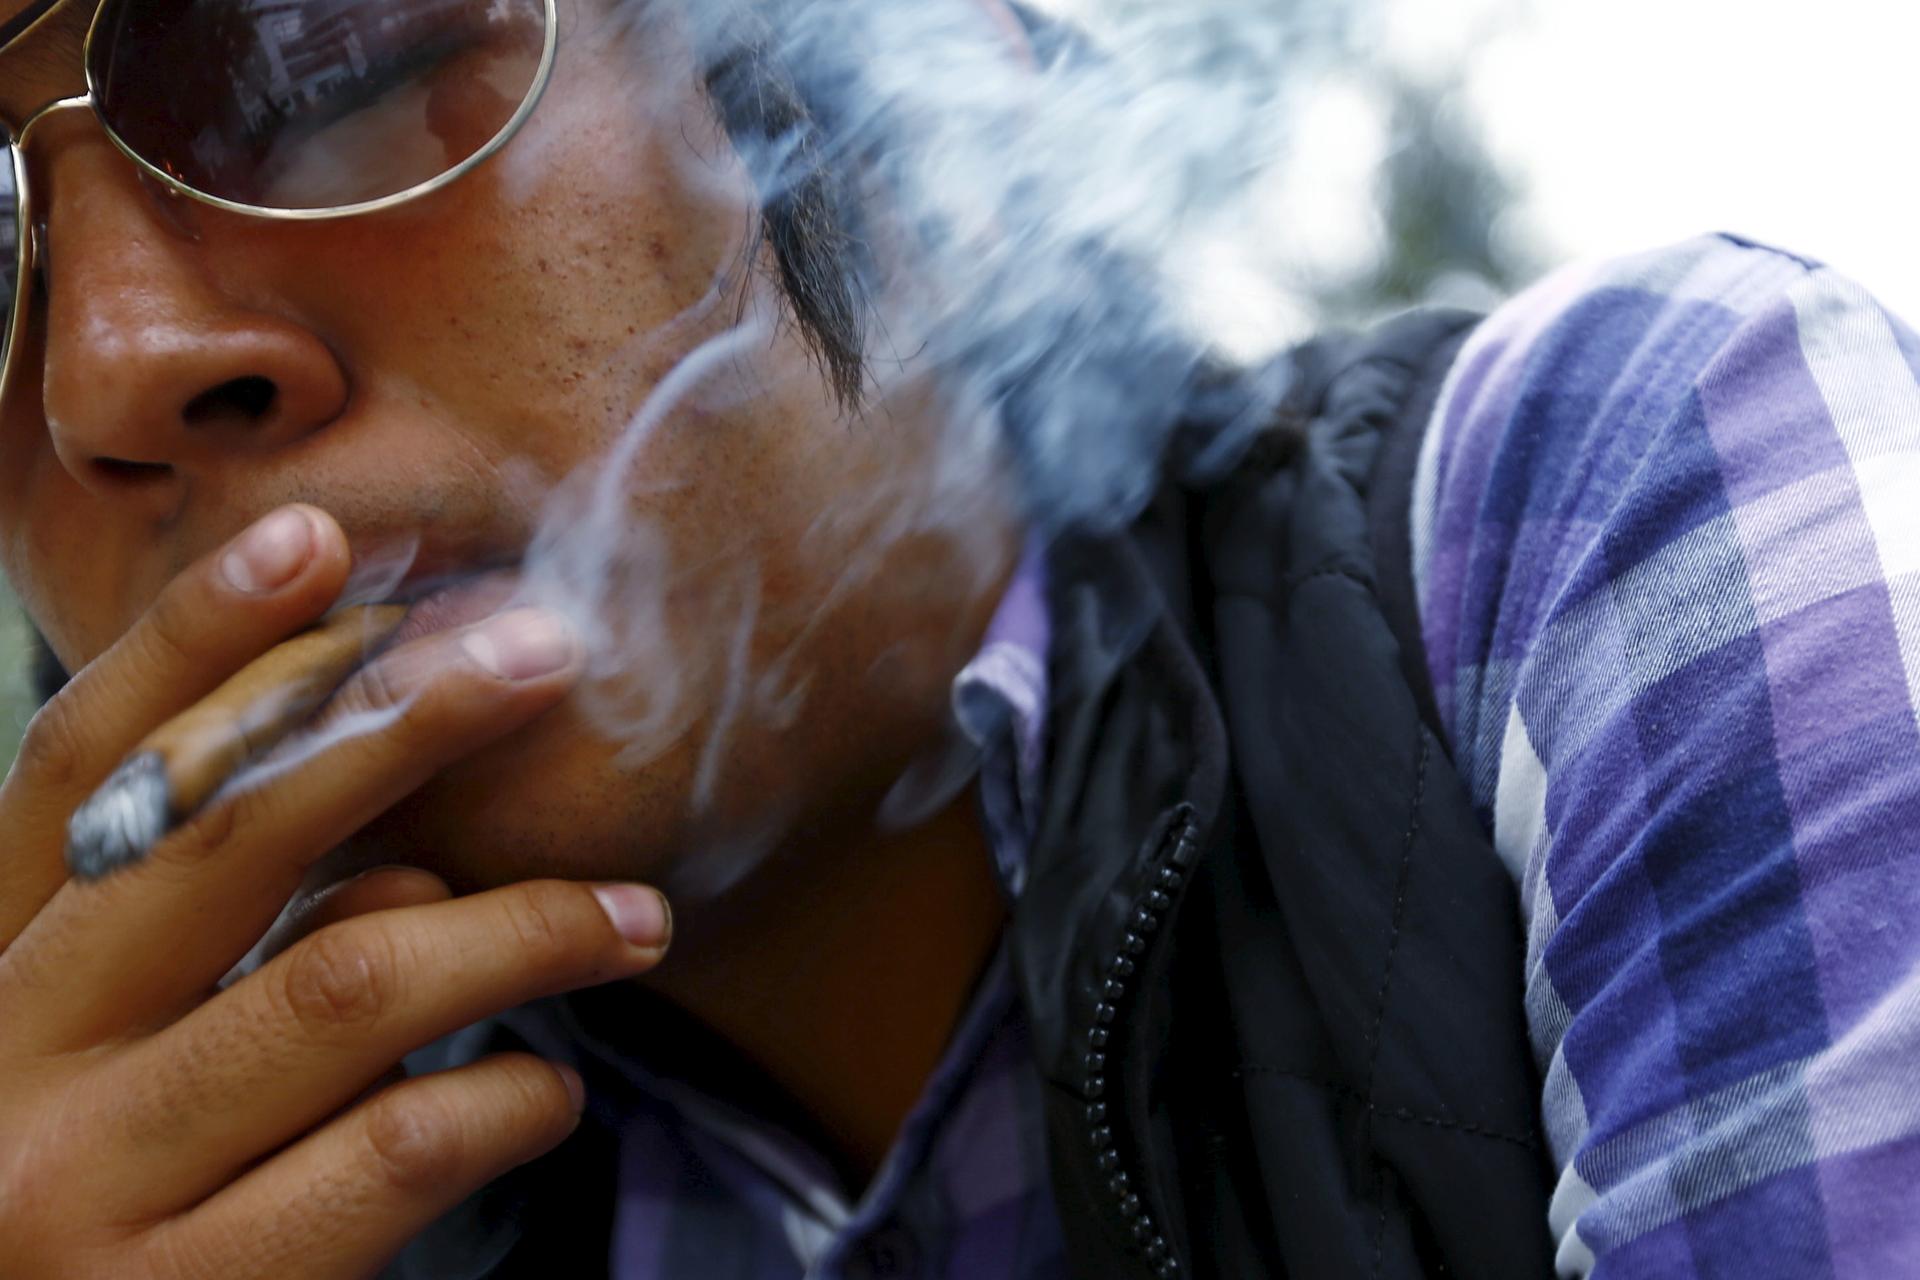 A man smokes during a rally to inform citizenship about marijuana use outside the Senate building in Mexico City, Mexico, July 7, 2015.